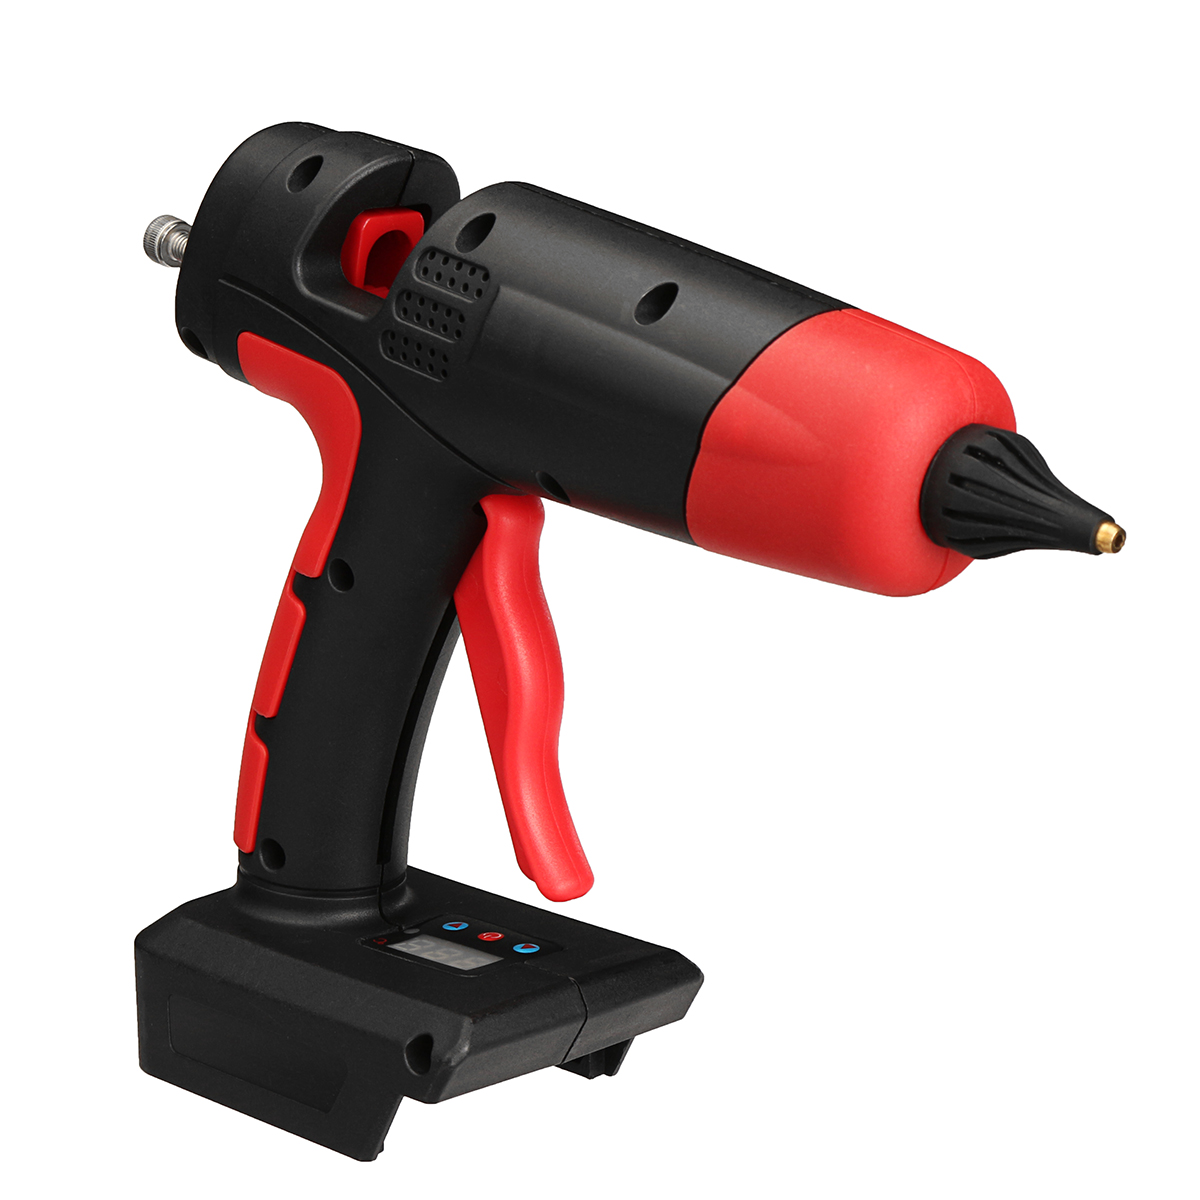 Find VIOLEWORKS Hot Melt Glue Guns Cordless Rechargeable Hot Glue Applicator Home Improvement Craft DIY Tool For Makita18V Battery for Sale on Gipsybee.com with cryptocurrencies